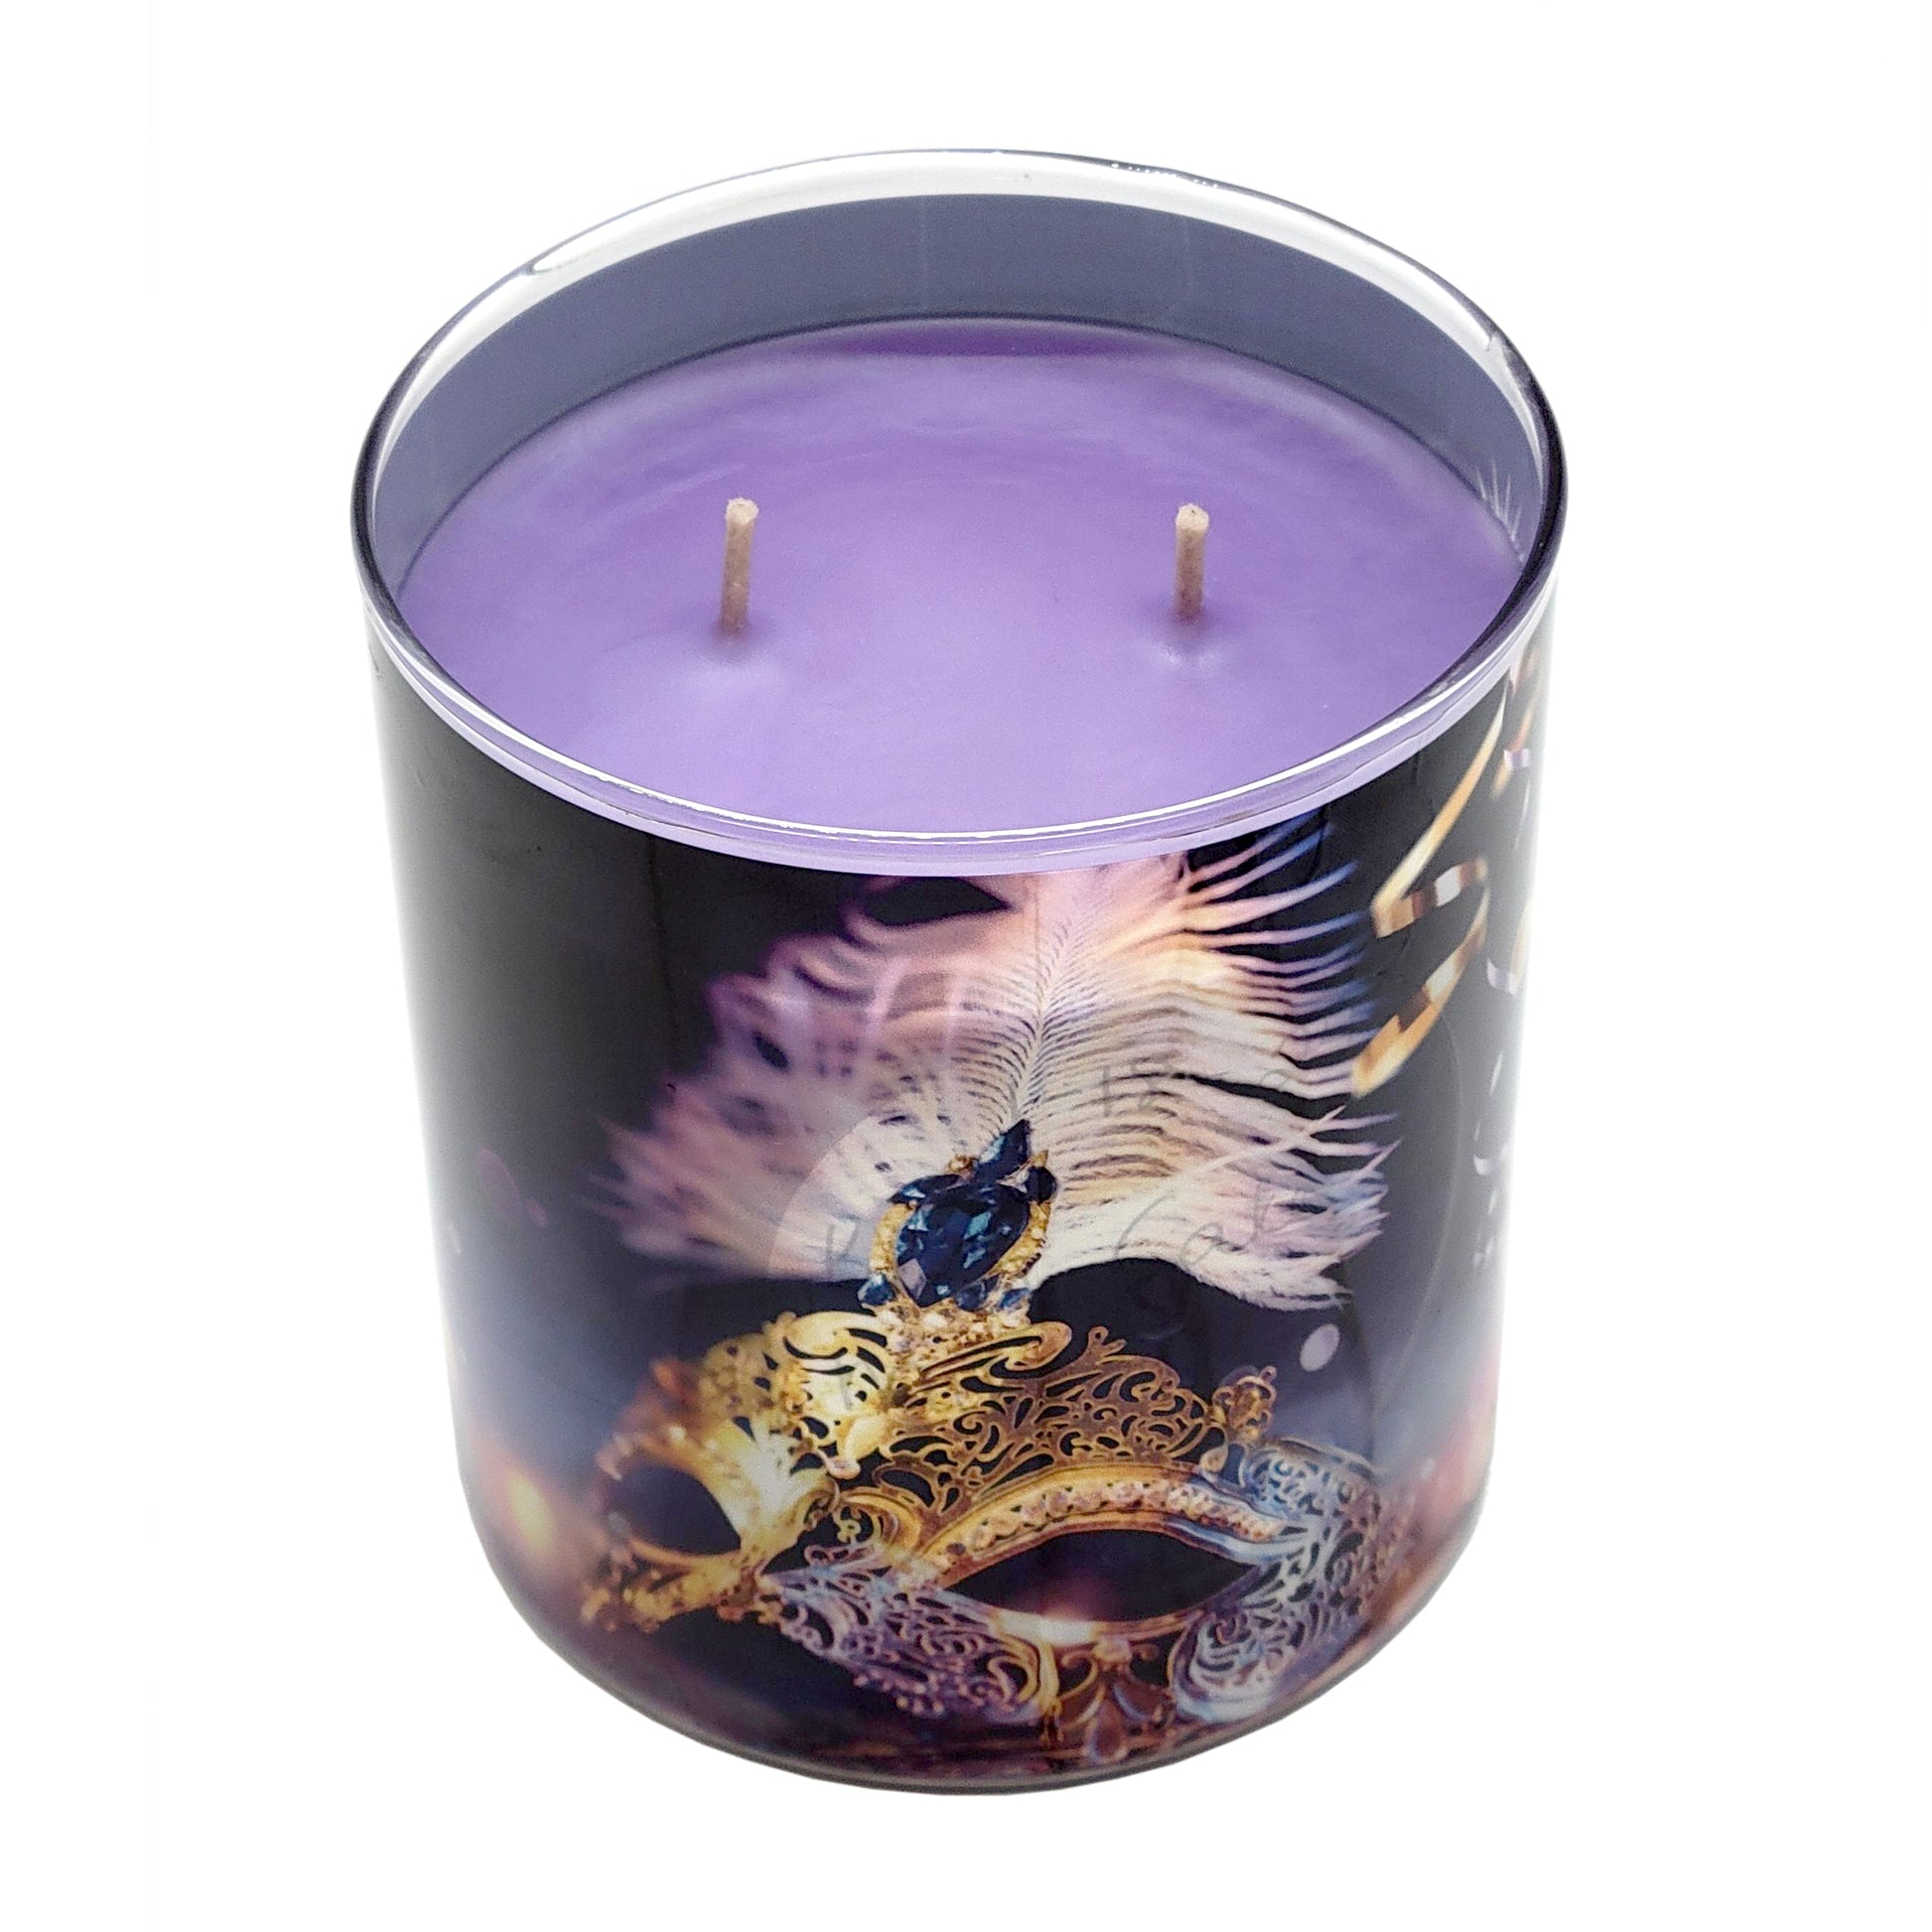 King Cake - Scented Candle